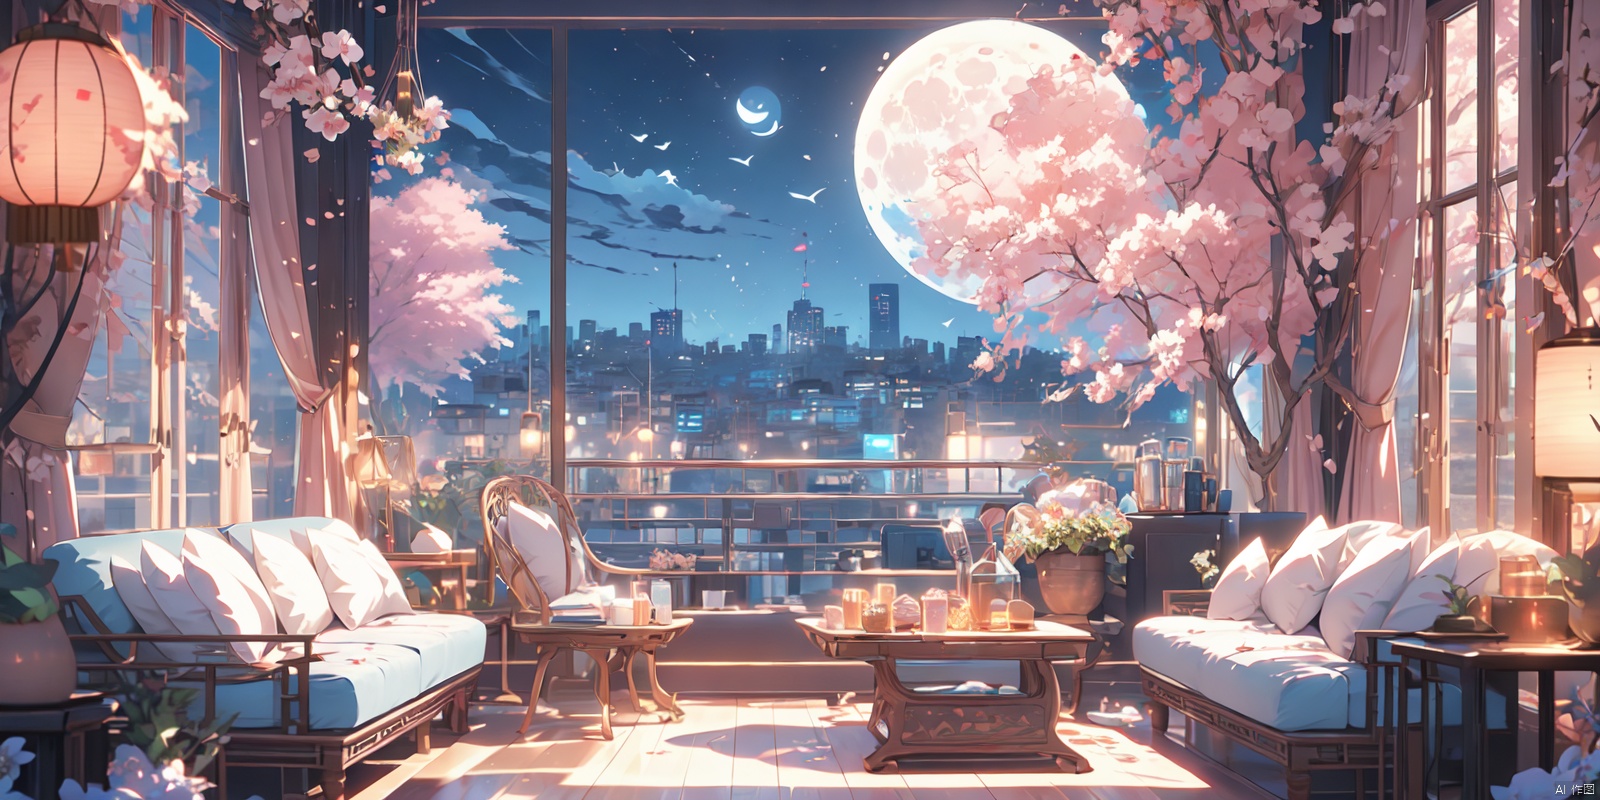 (masterpiece: 1.2) , best quality, 8k, comfortable animated scenes, Chinese architecture, cyberpunk, full moon, Meteor, oversized cat, interior, strong light and shadow contrast, fantasy colors, sofa, pillow, no people, trees, flowers, floor-to-ceiling windows, birds, pink room, wide angle, depth of field, mid-shot, healing, ultra detail, 1 girl, watercolor \(medium\)